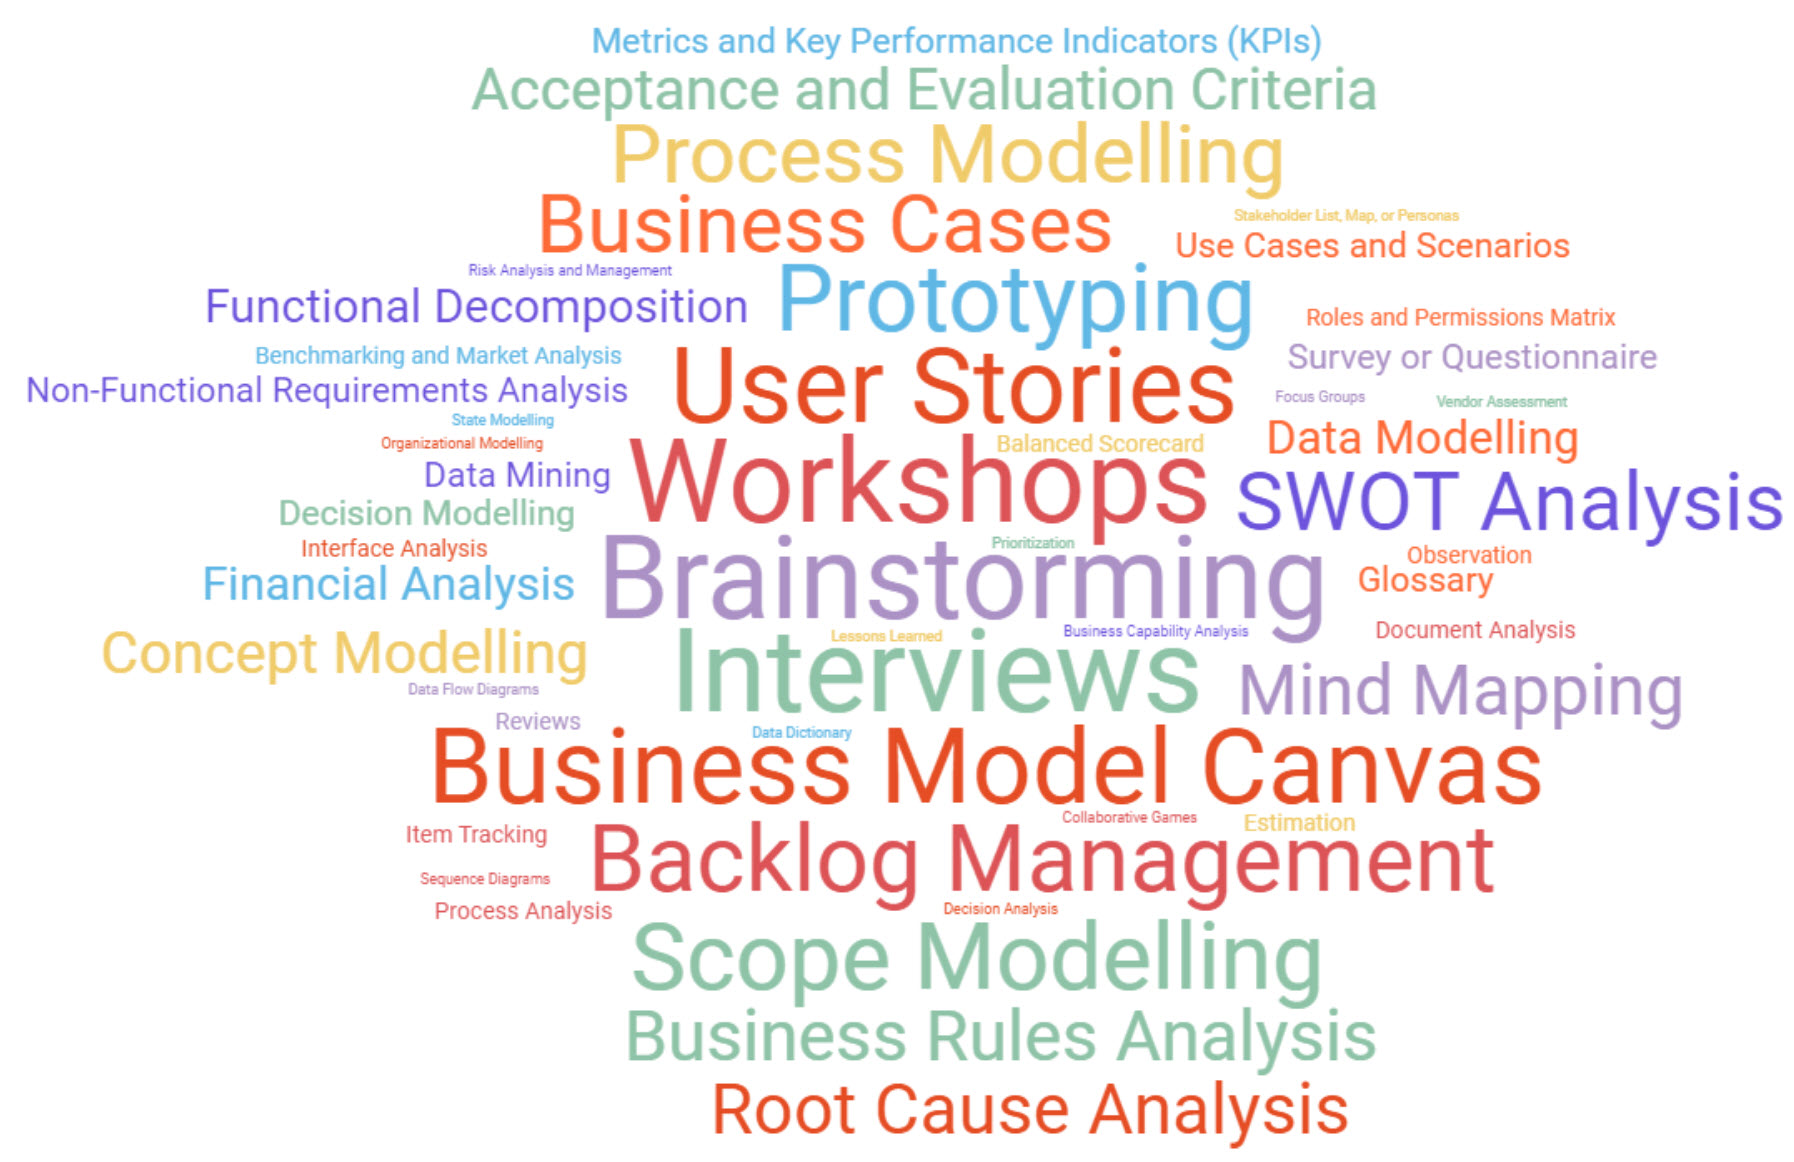 Business Analysis Techniques word cloud.jpg